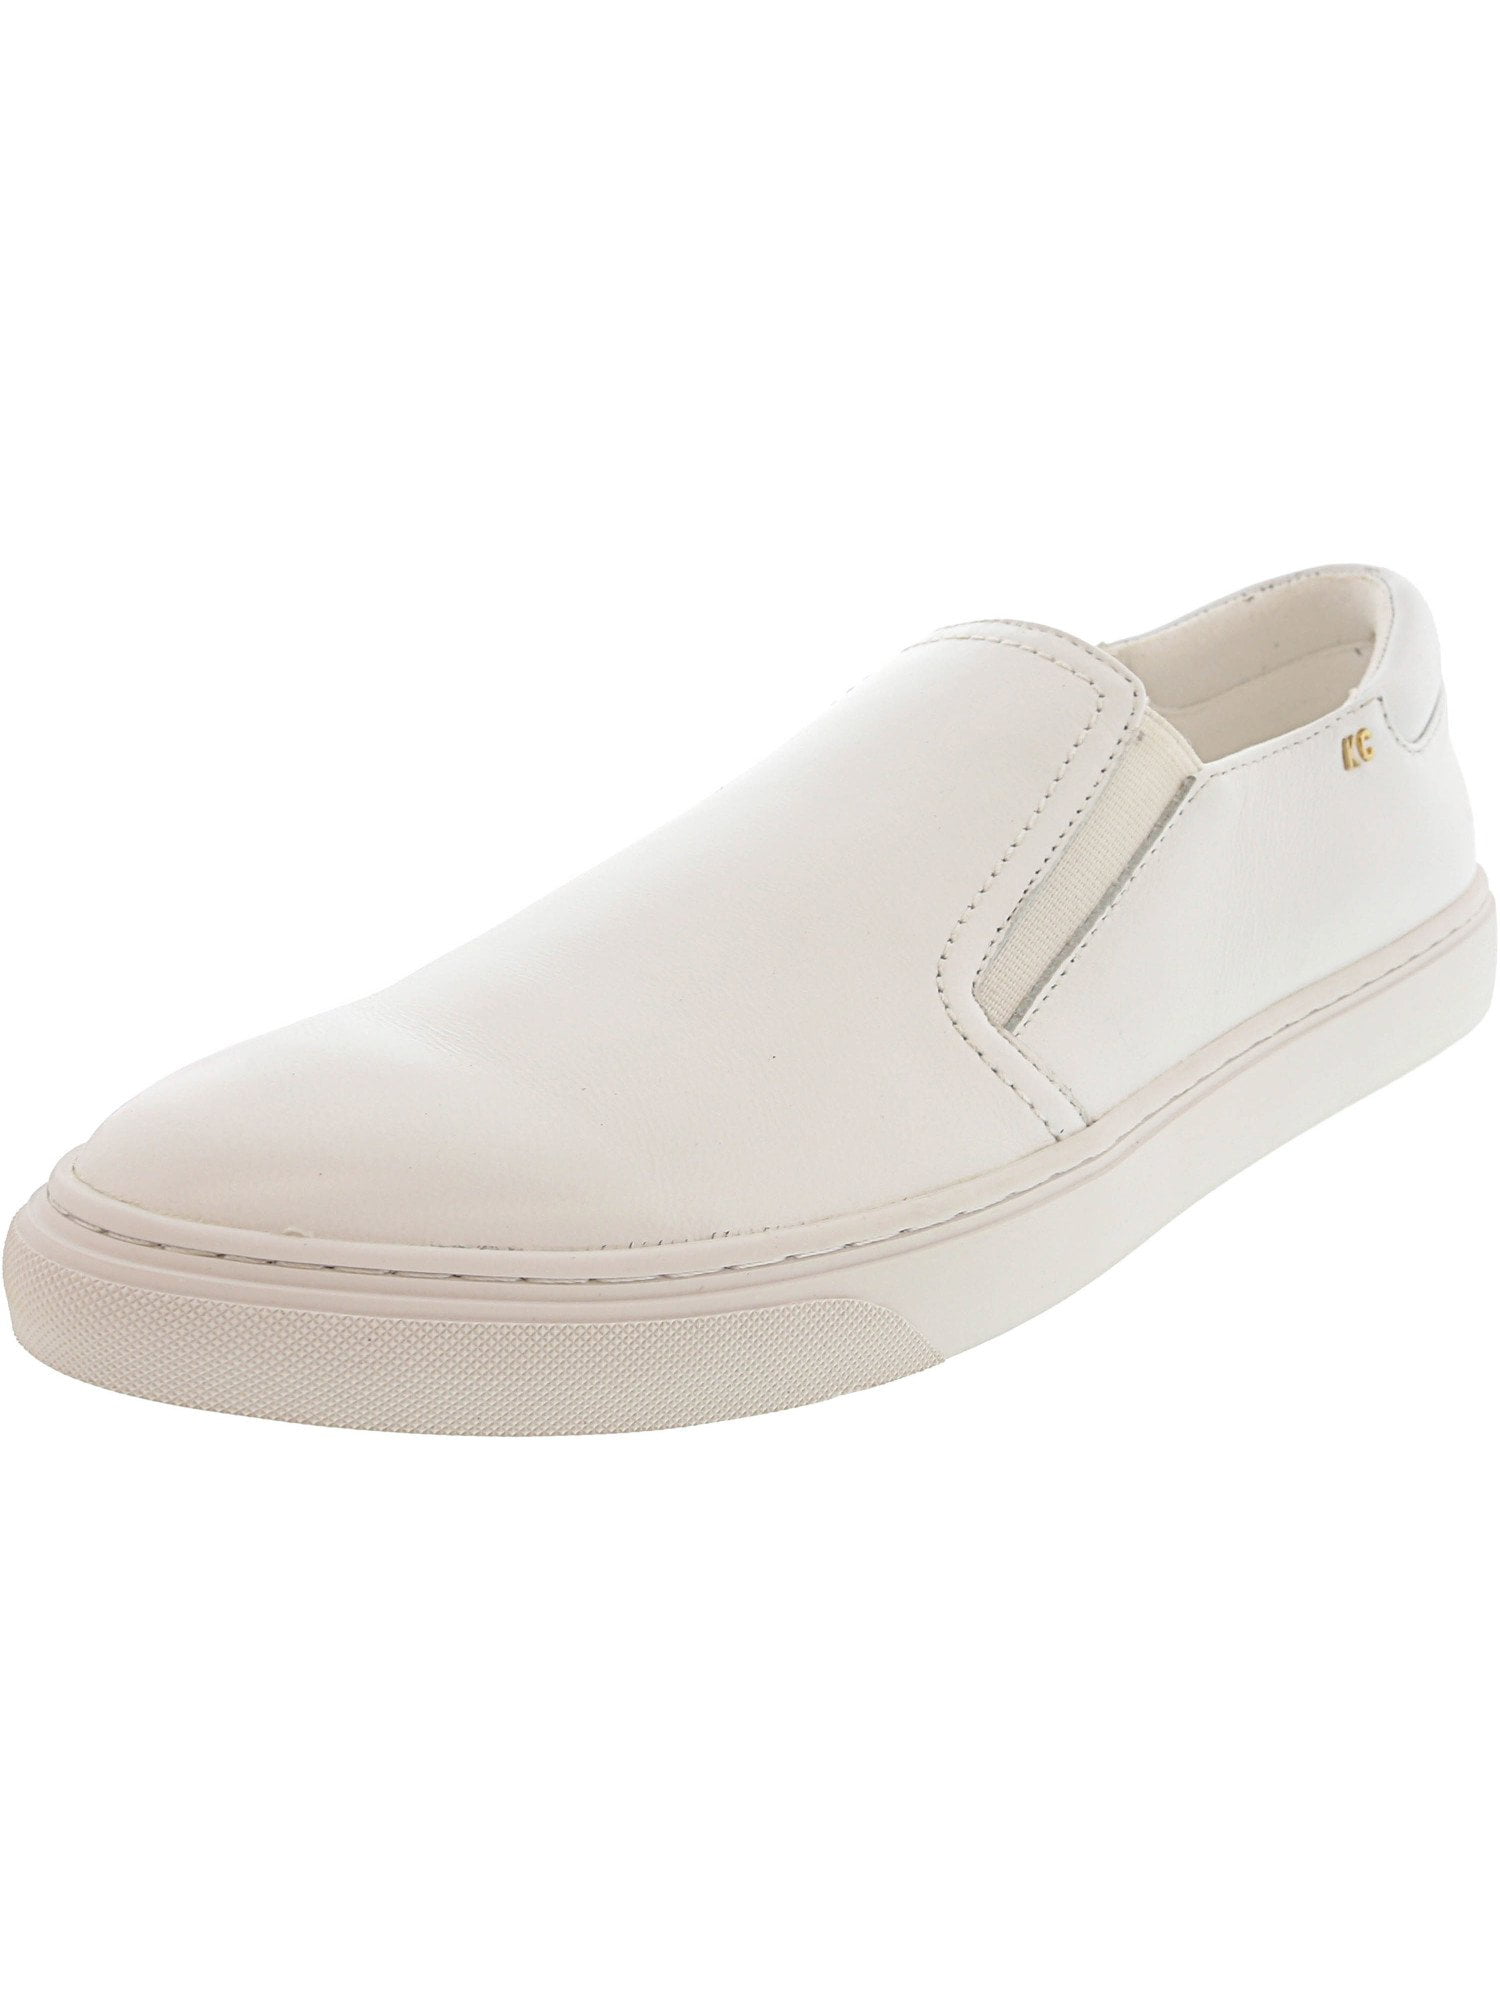 kenneth cole comfort shoes